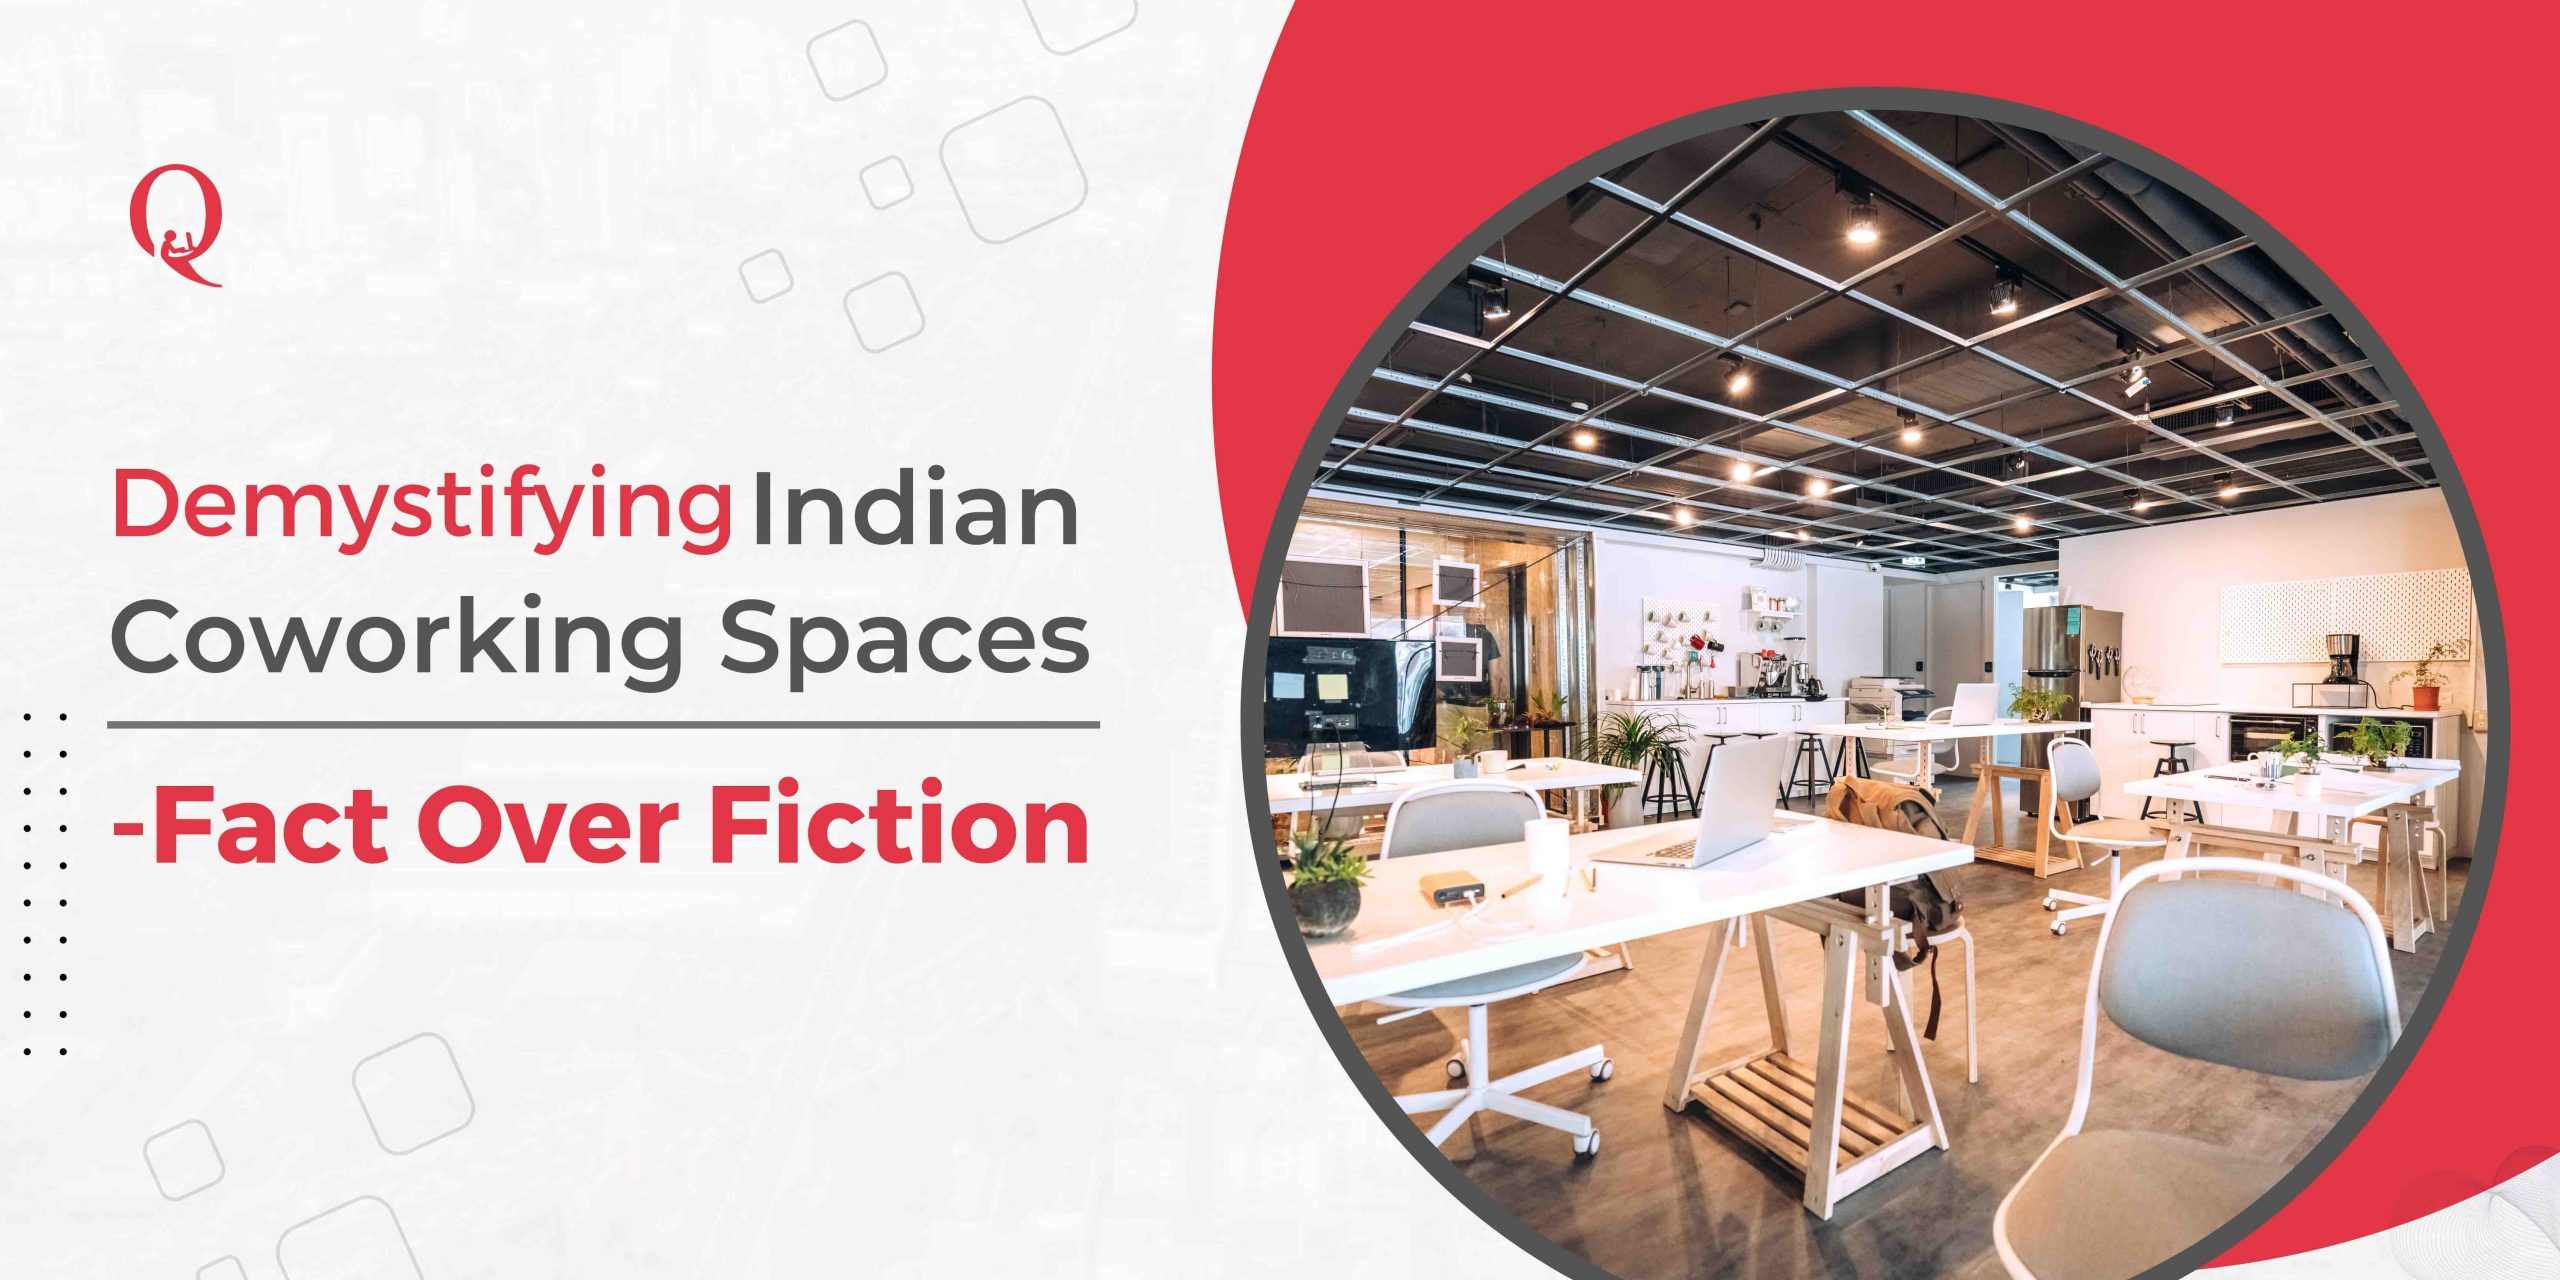 Indian Coworking Spaces - Fact Over Fiction